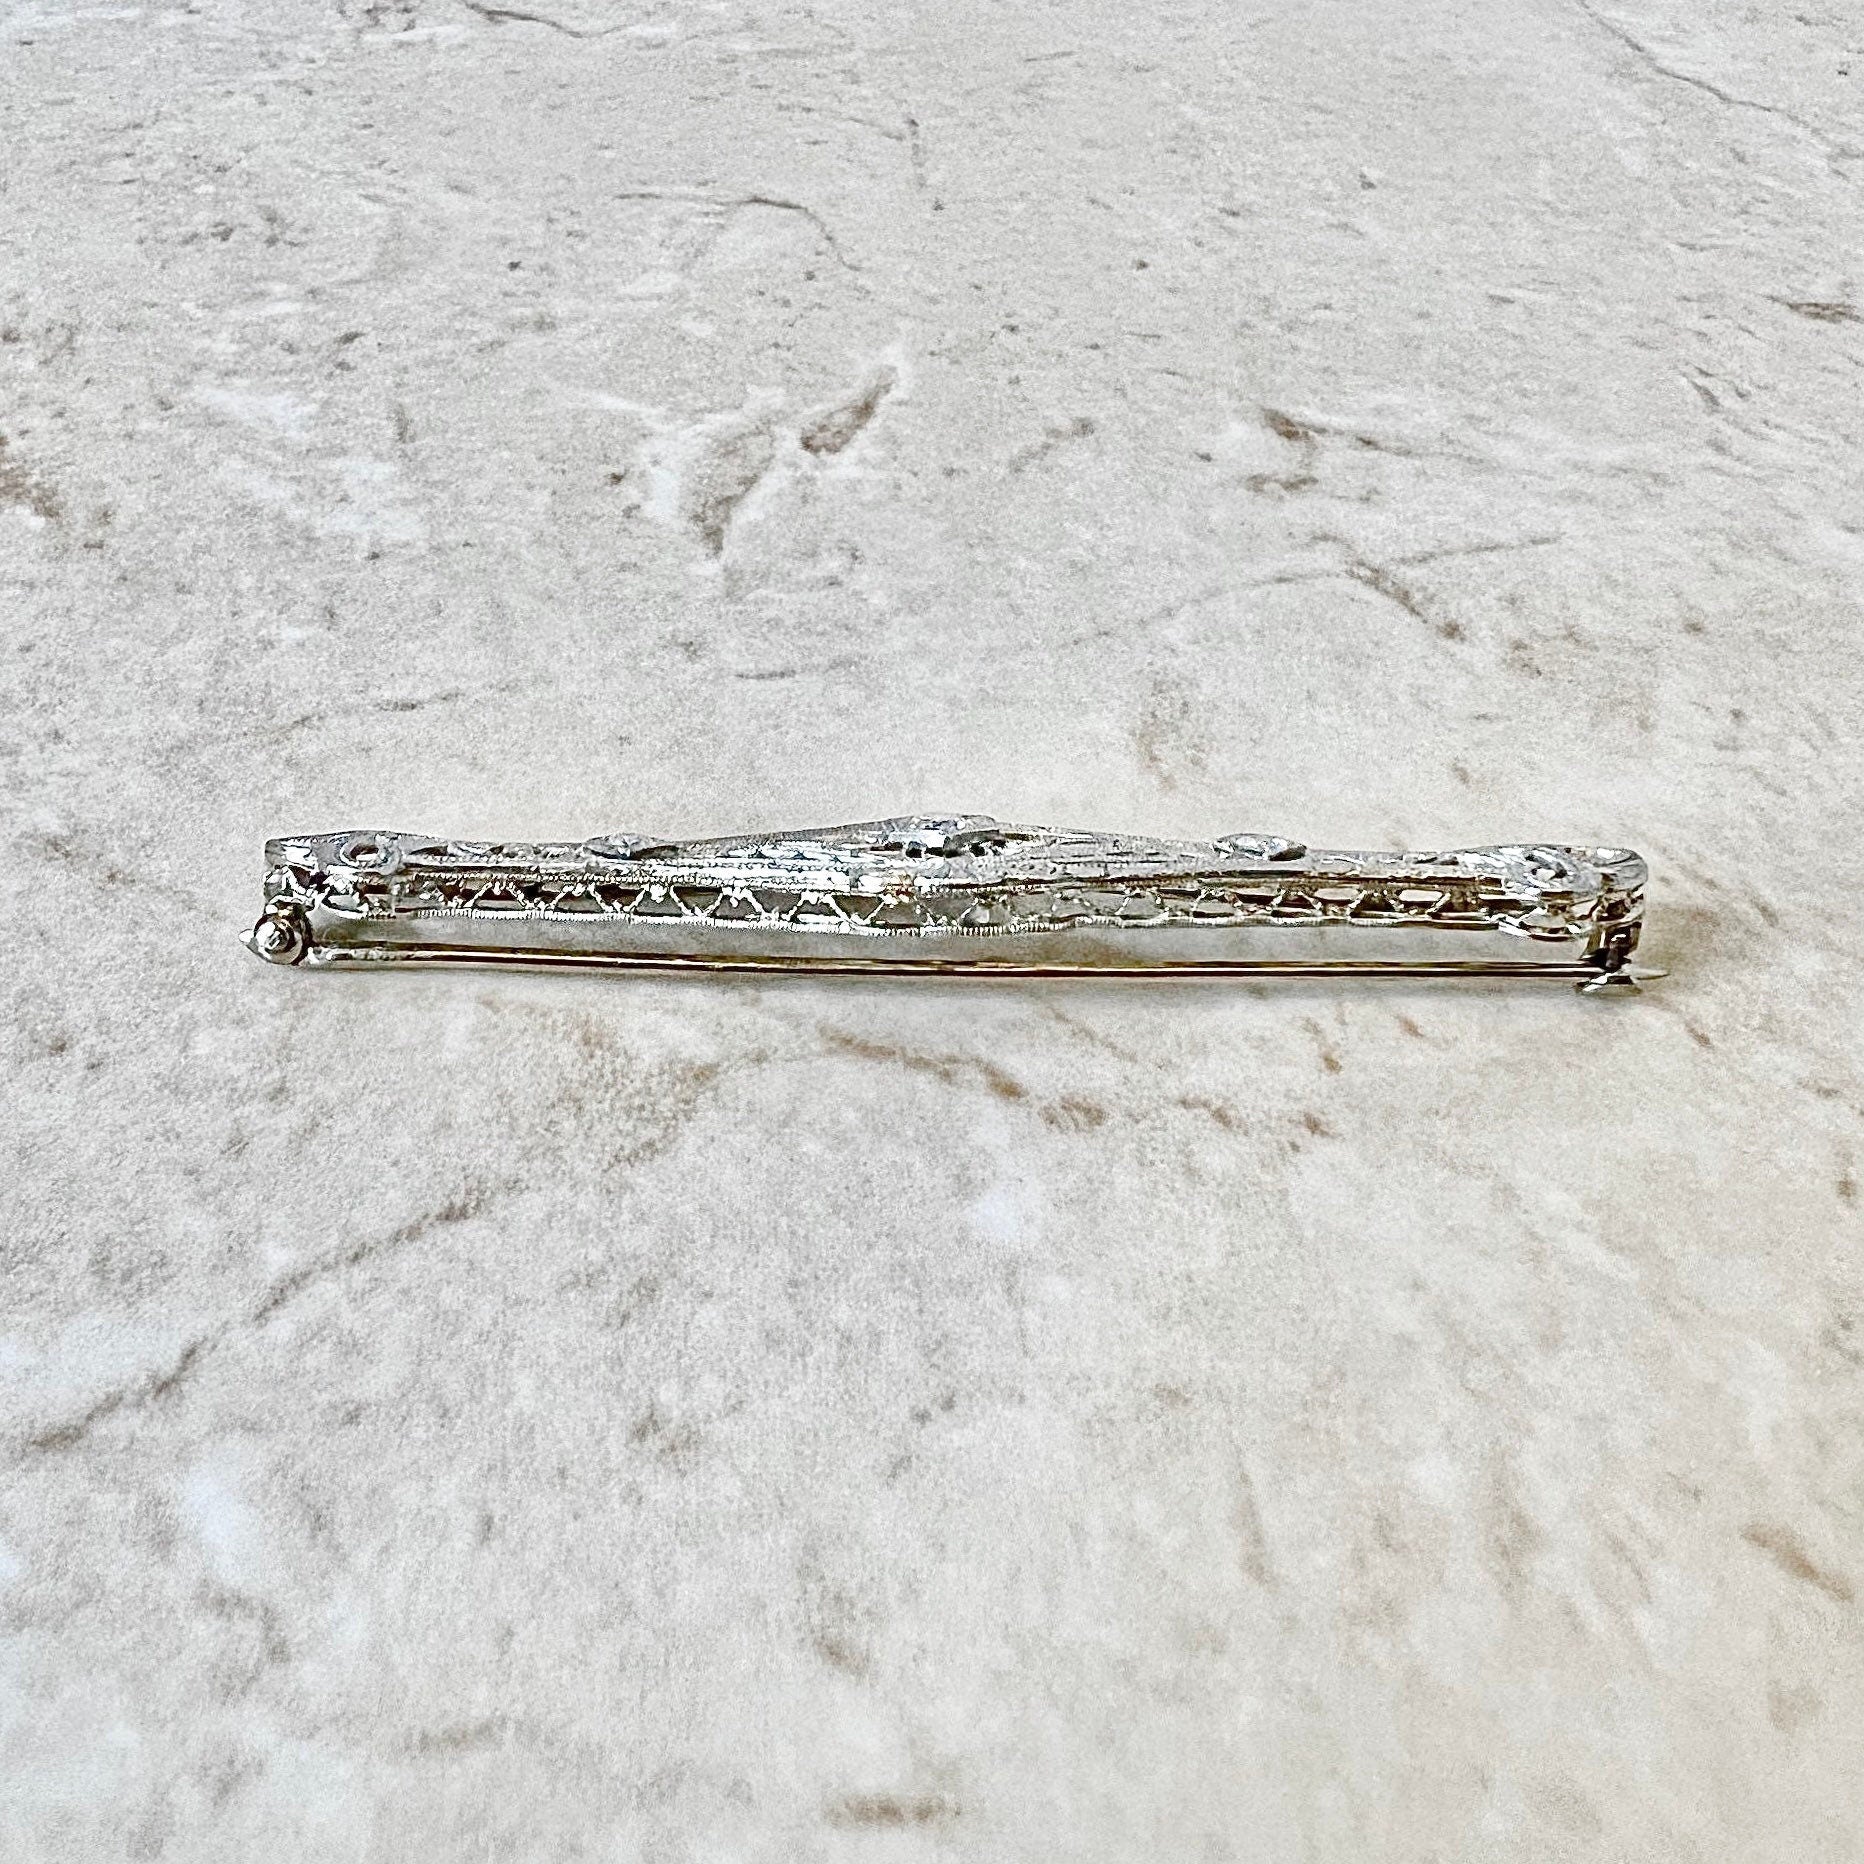 Vintage Art Deco Filigree Diamond Brooch - White Gold & Platinum - Diamond Pin - Art Deco Brooch - Holiday Gift - Gifts For Her